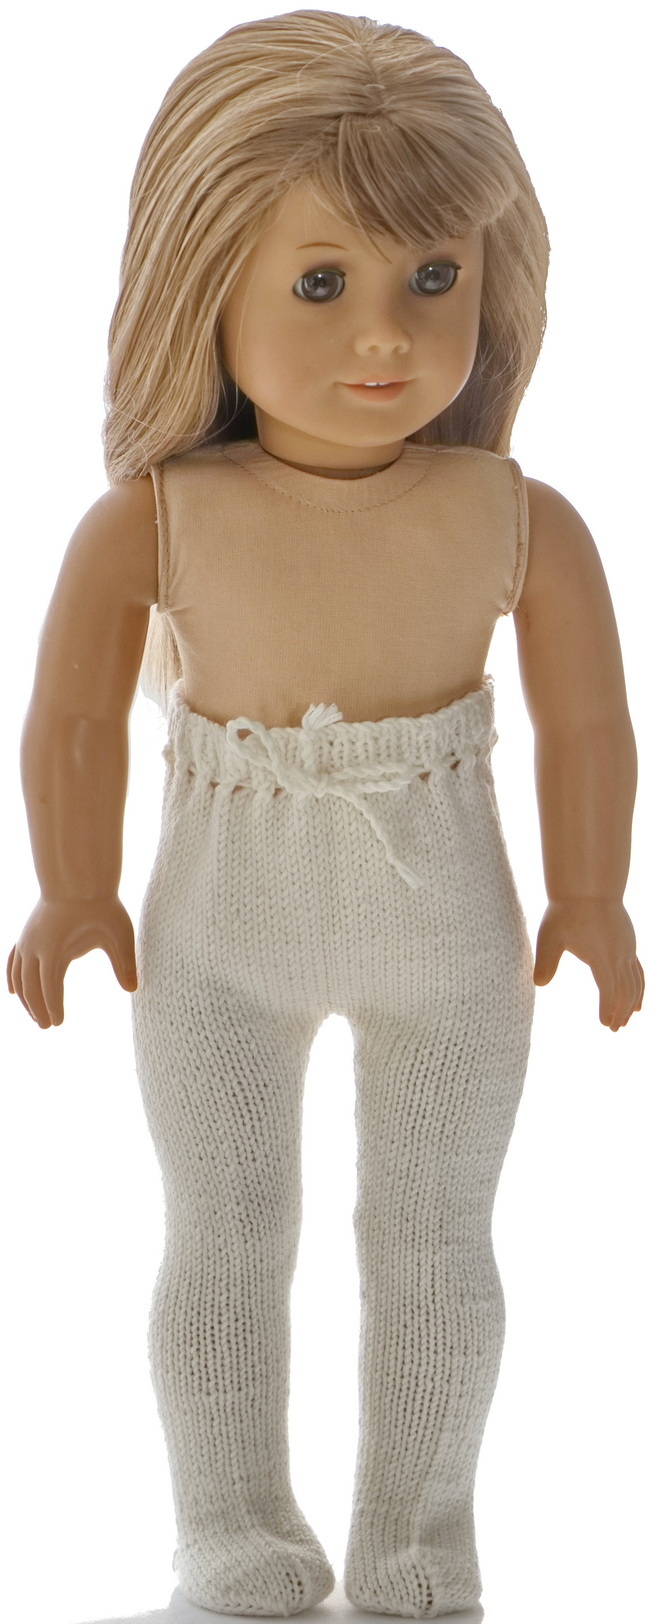 Adorable doll dress knitted in a beautiful old pattern